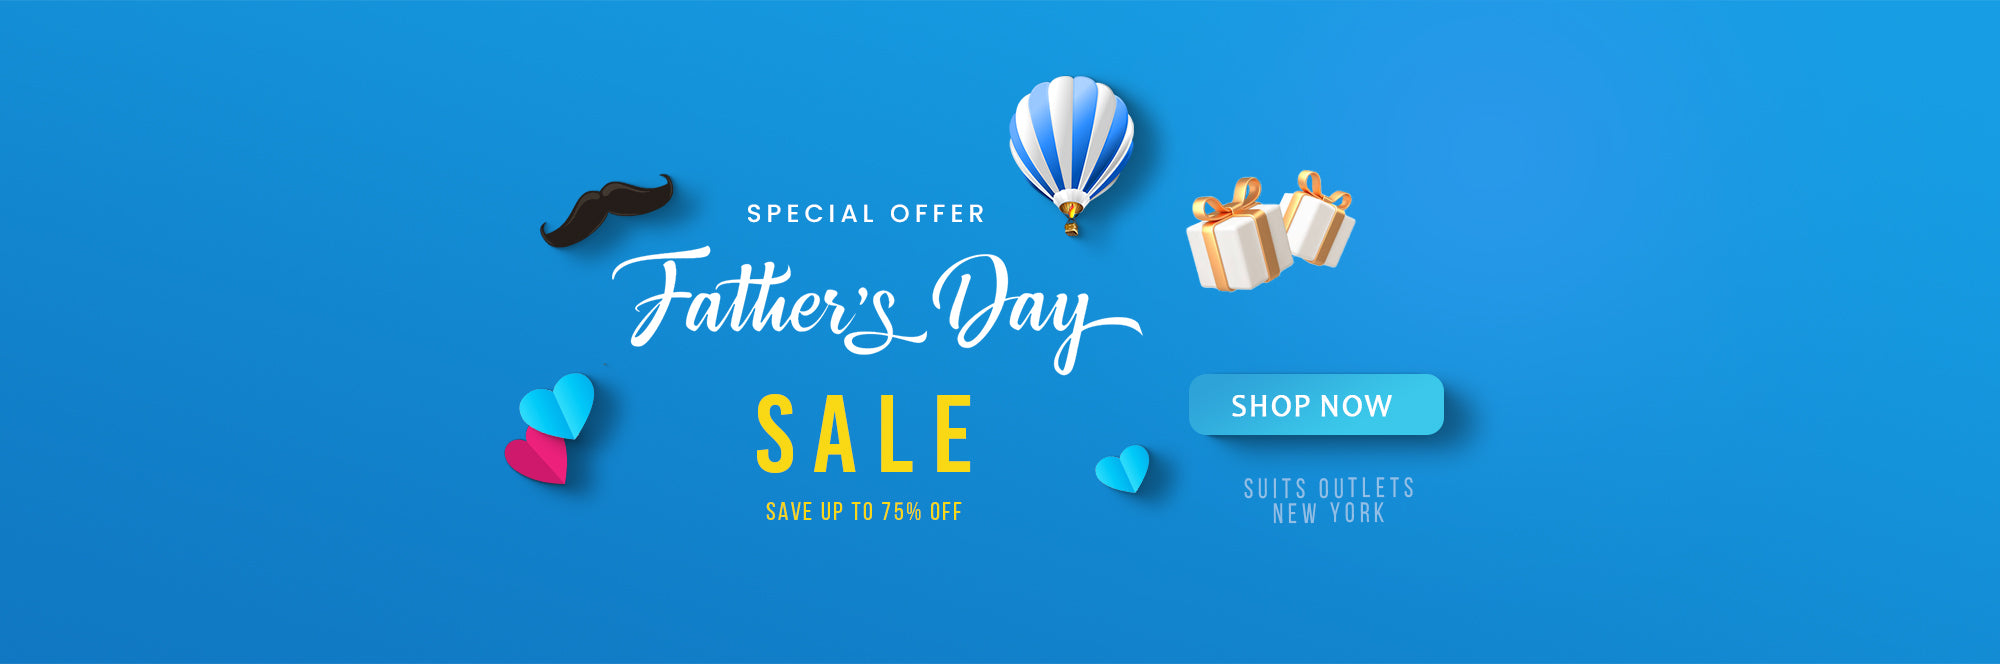 father's day suit sale